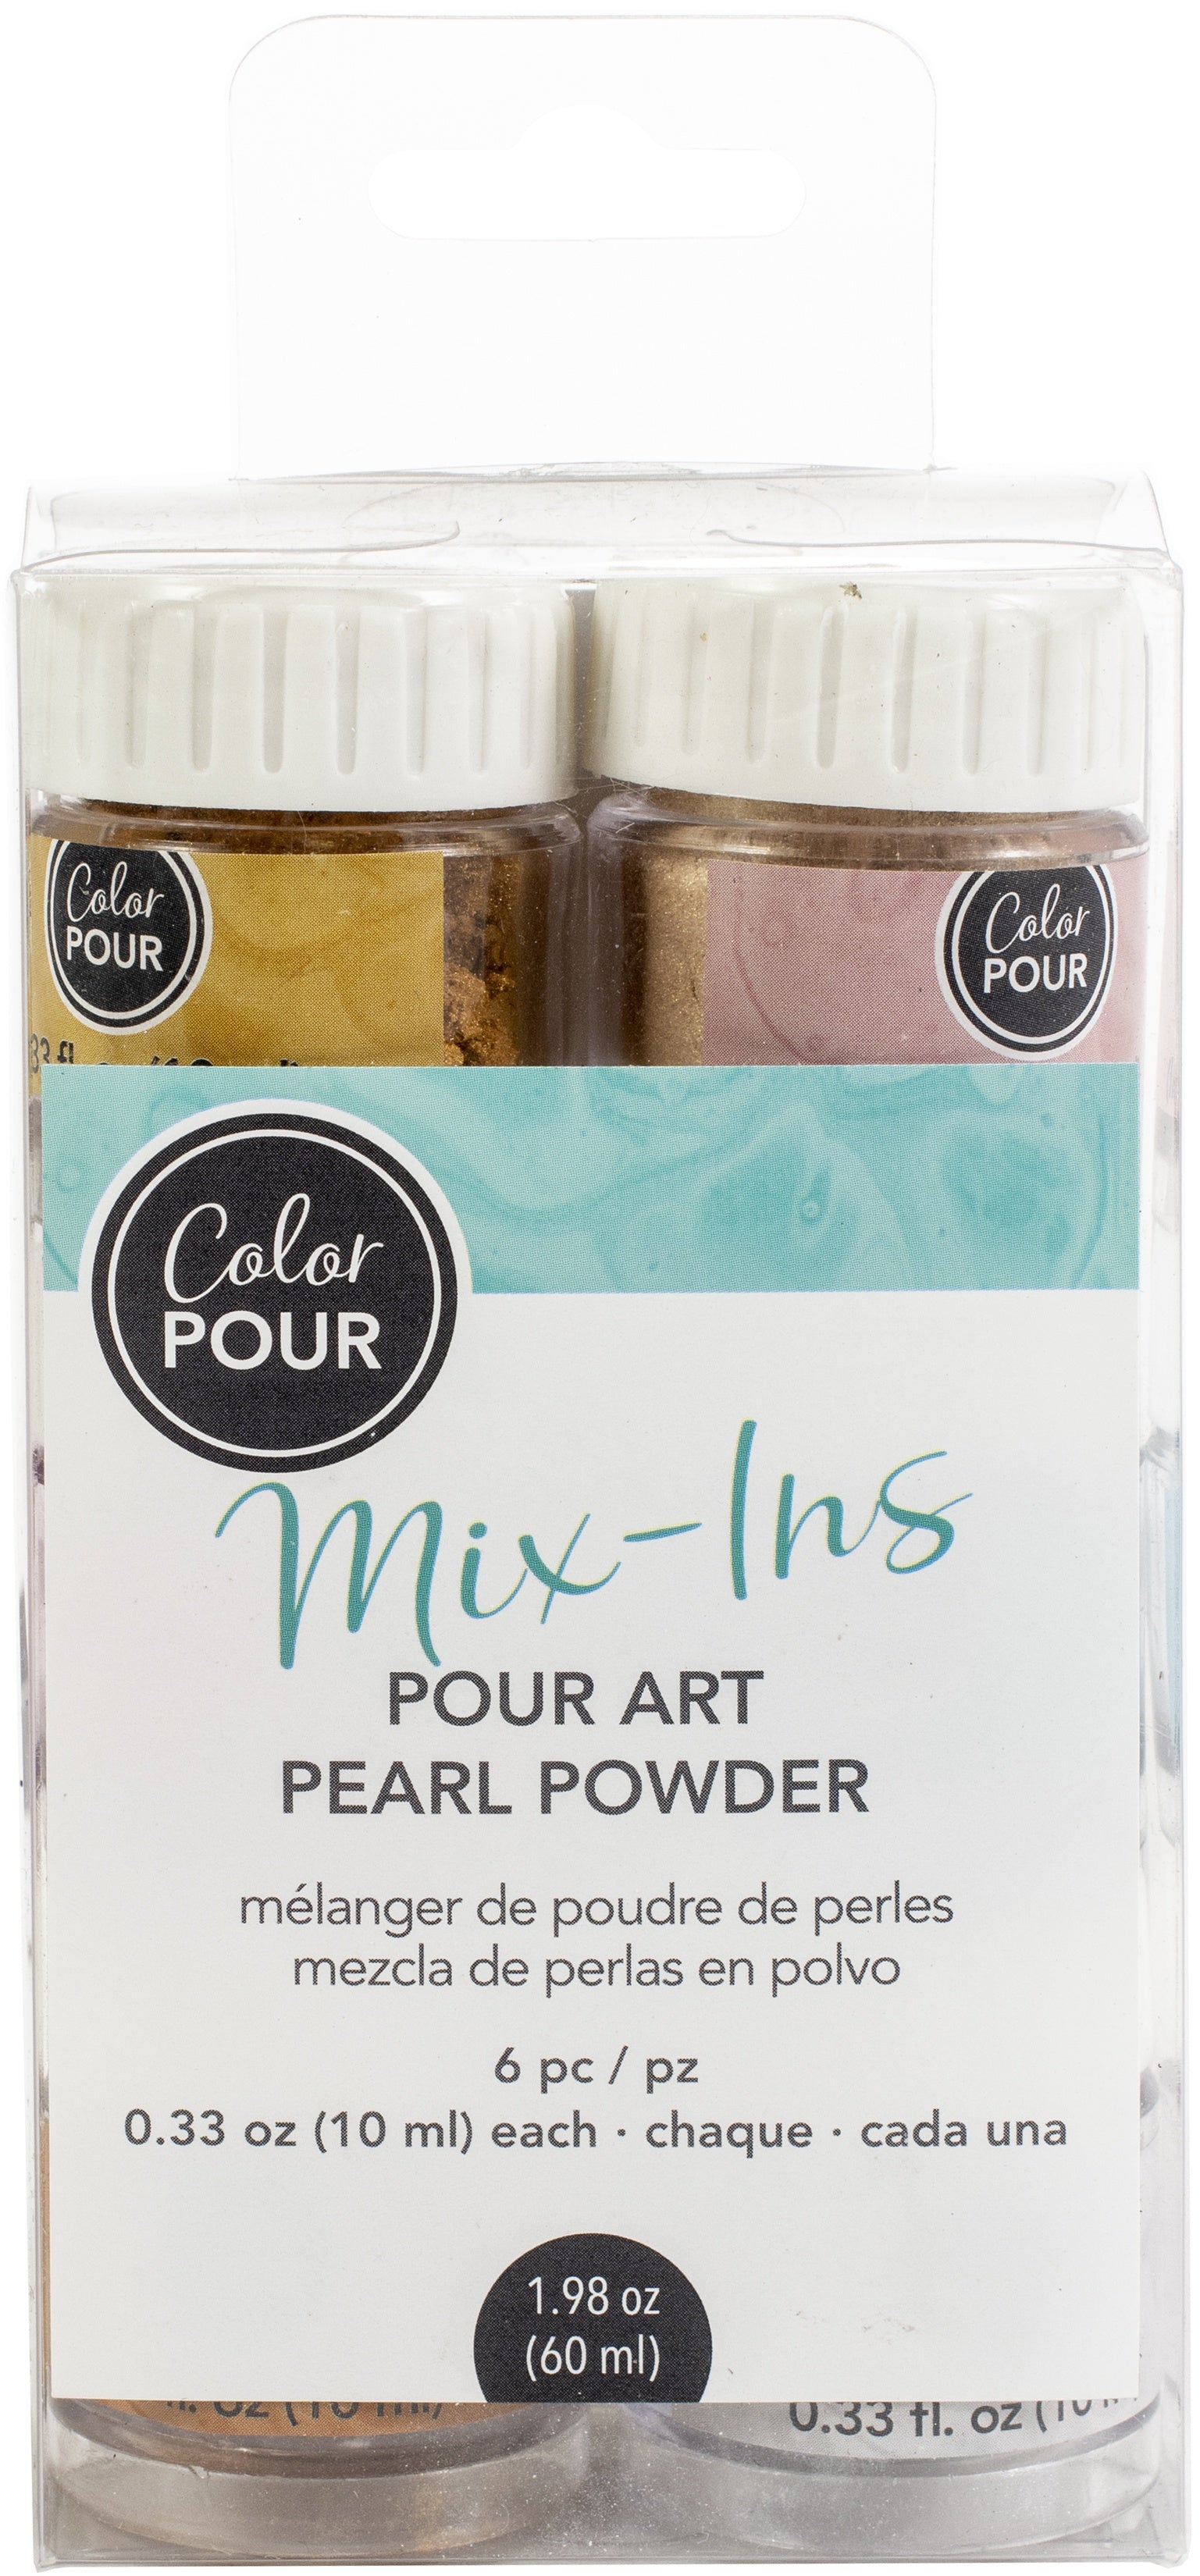 American Crafts Color Pour Pearl Powder Mix-In Kit